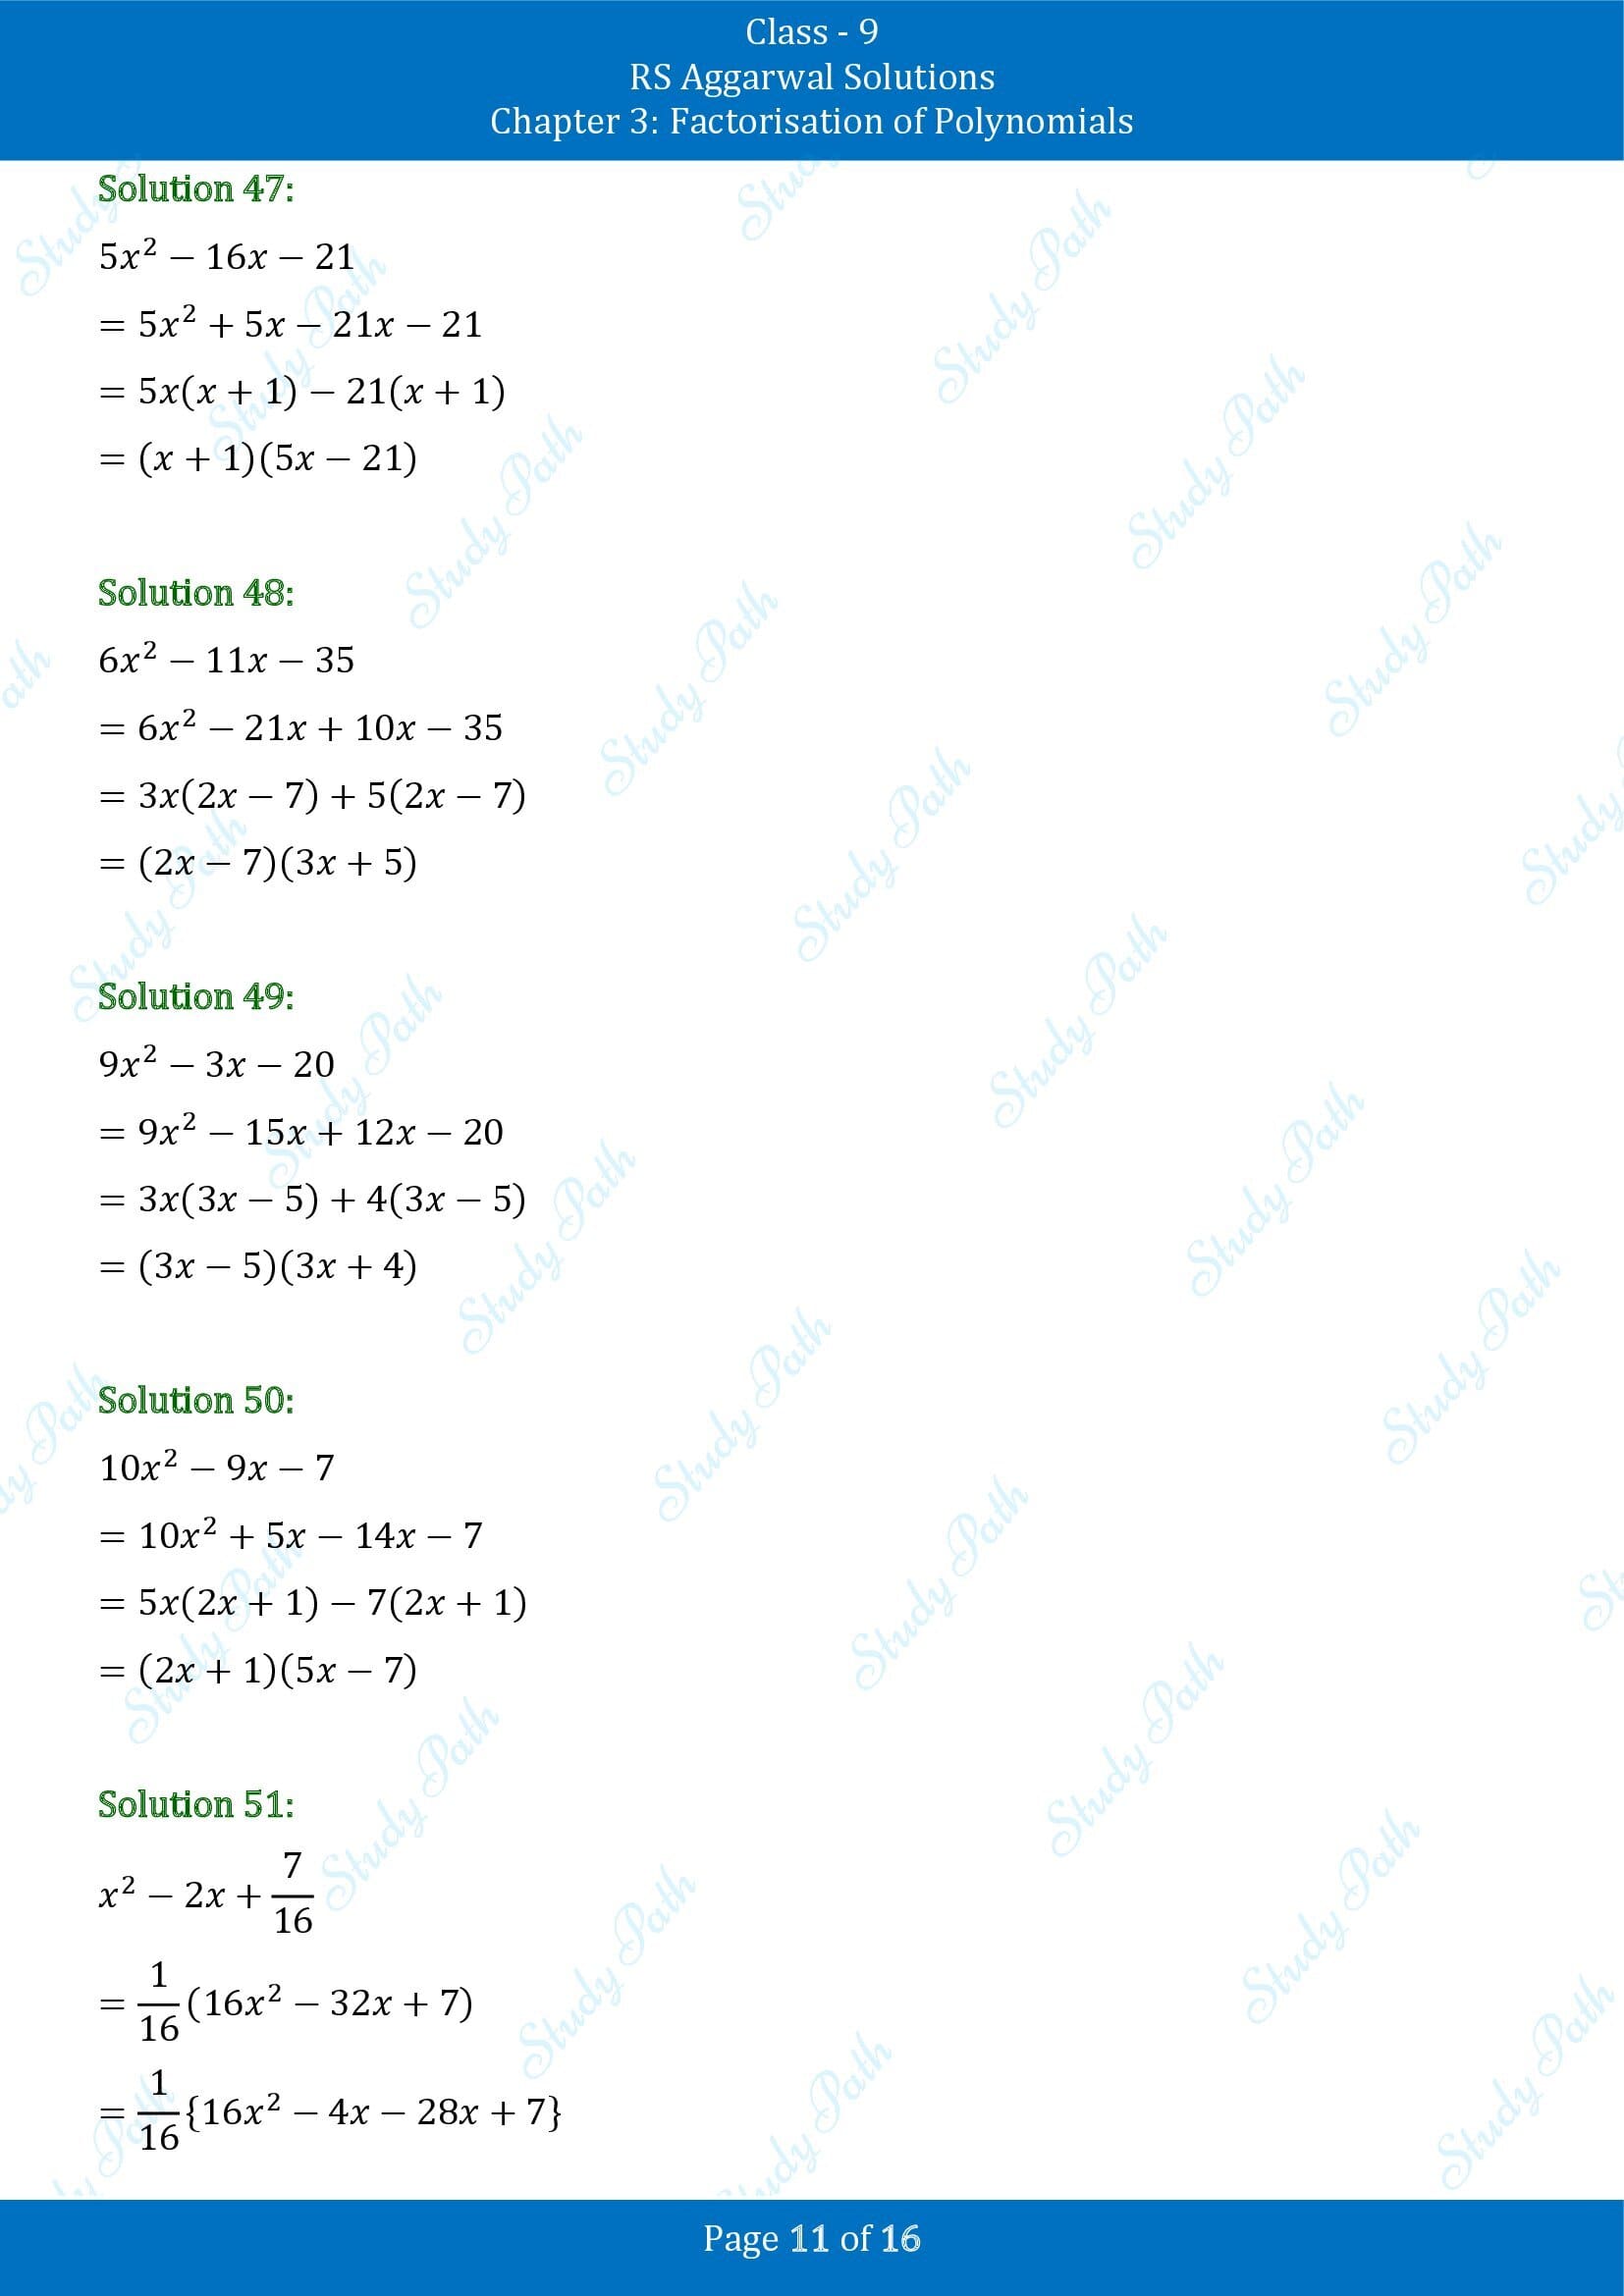 RS Aggarwal Solutions Class 9 Chapter 3 Factorisation of Polynomials Exercise 3C 00011